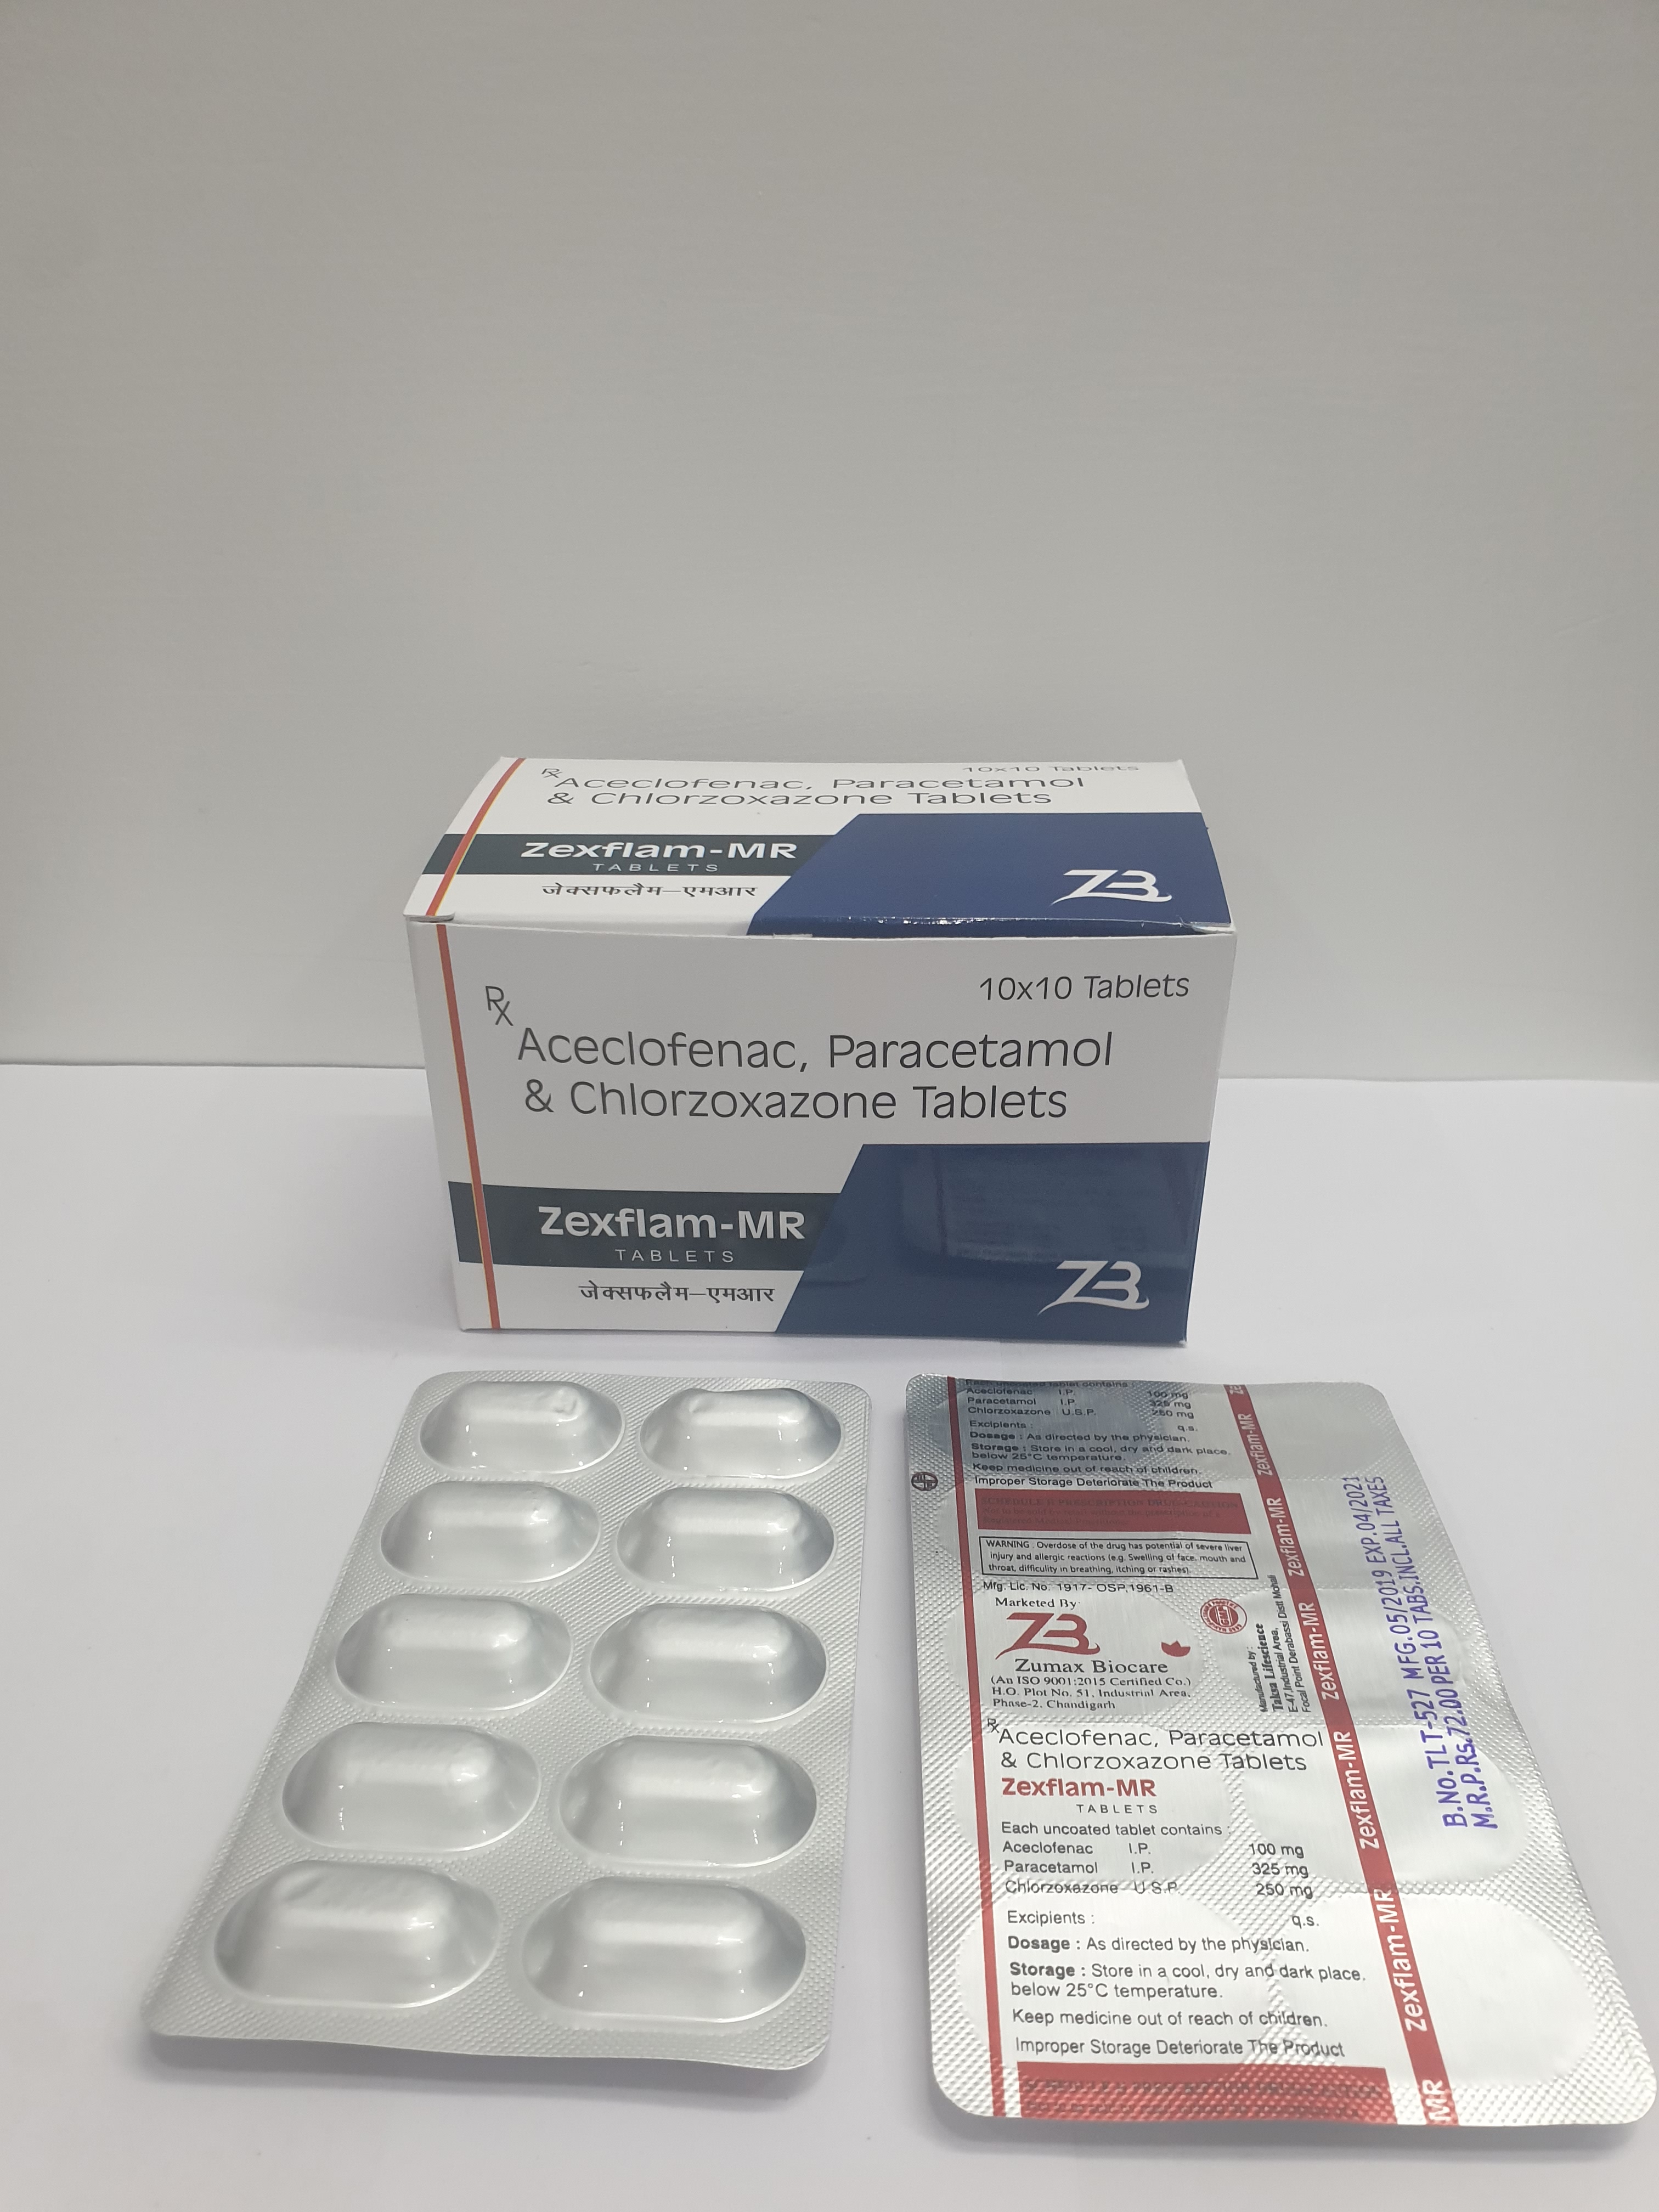 Product Name: Zexflam MR, Compositions of Zexflam MR are Aceclofenac, Paracetamol & Chlorzoxazone Tablets - Zumax Biocare